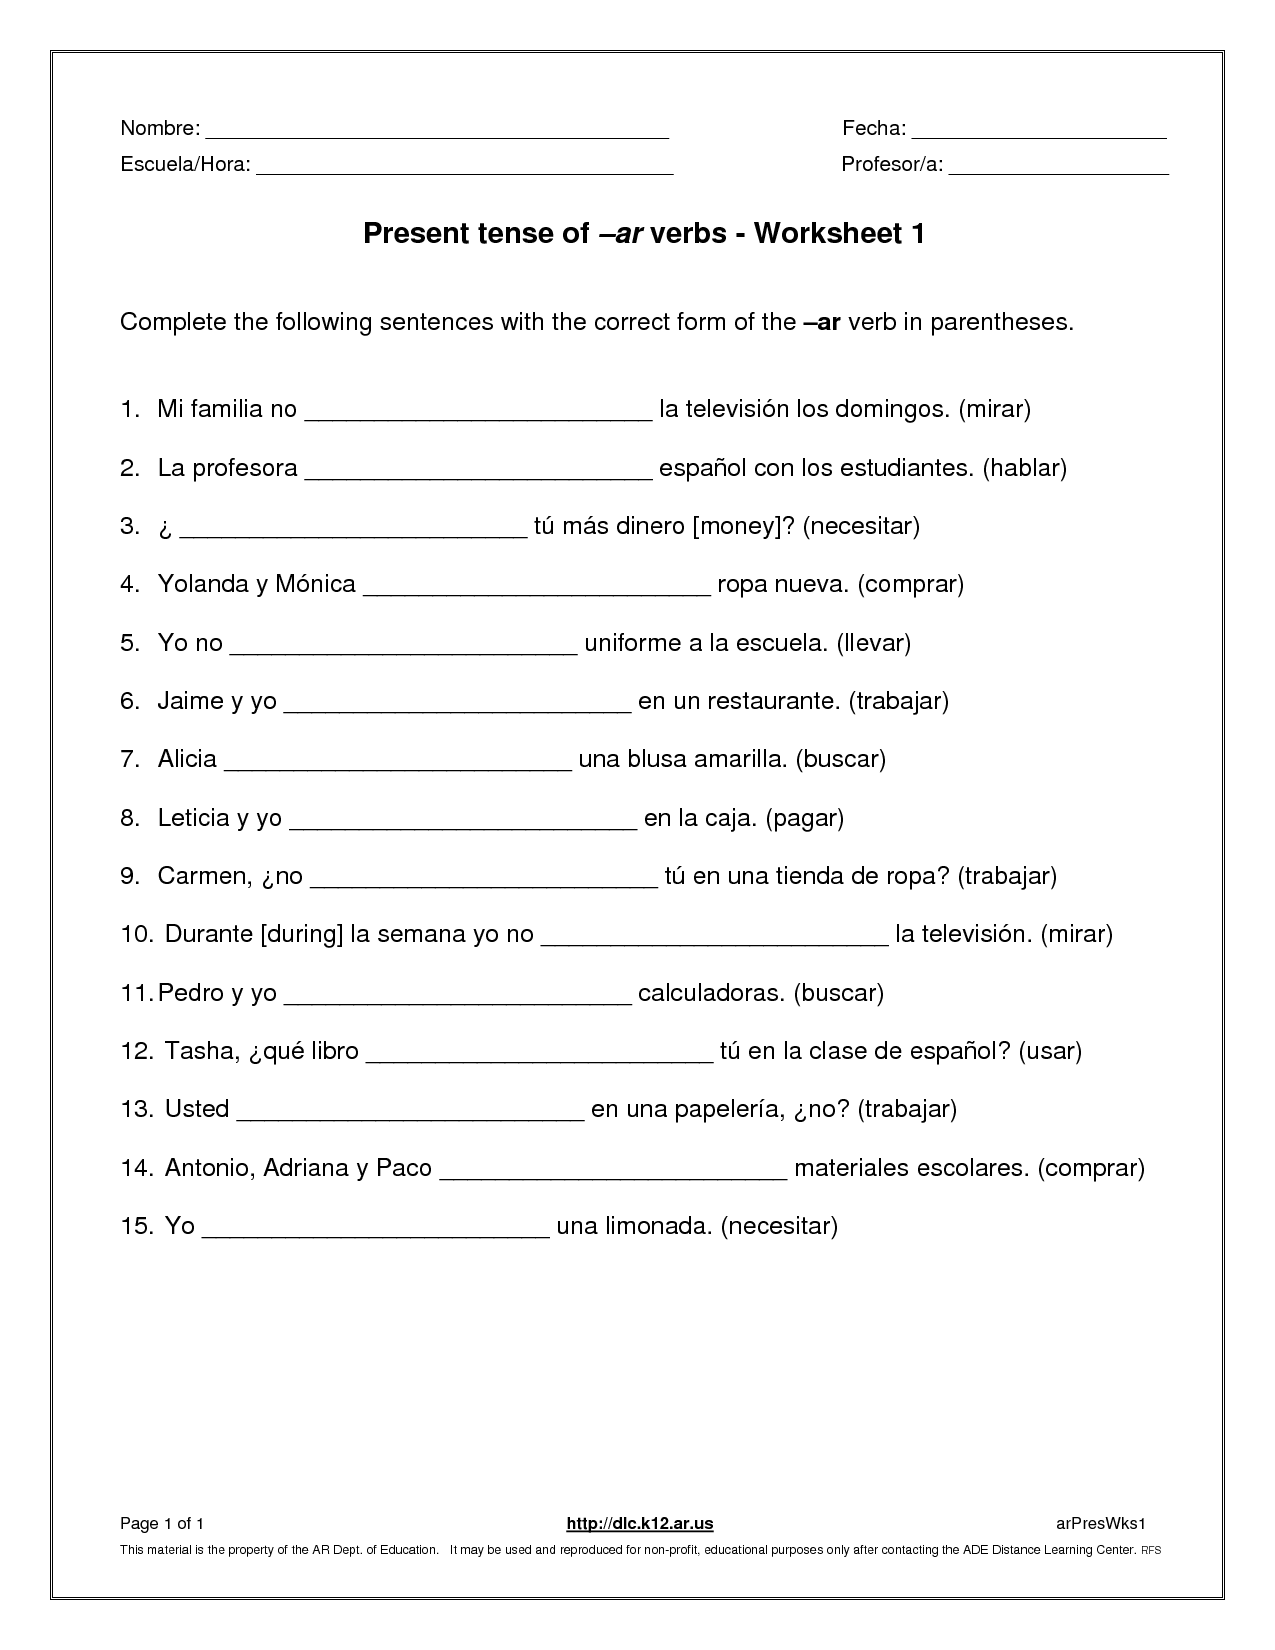 12-best-images-of-french-verbs-printable-worksheets-free-printable-irregular-verbs-worksheets